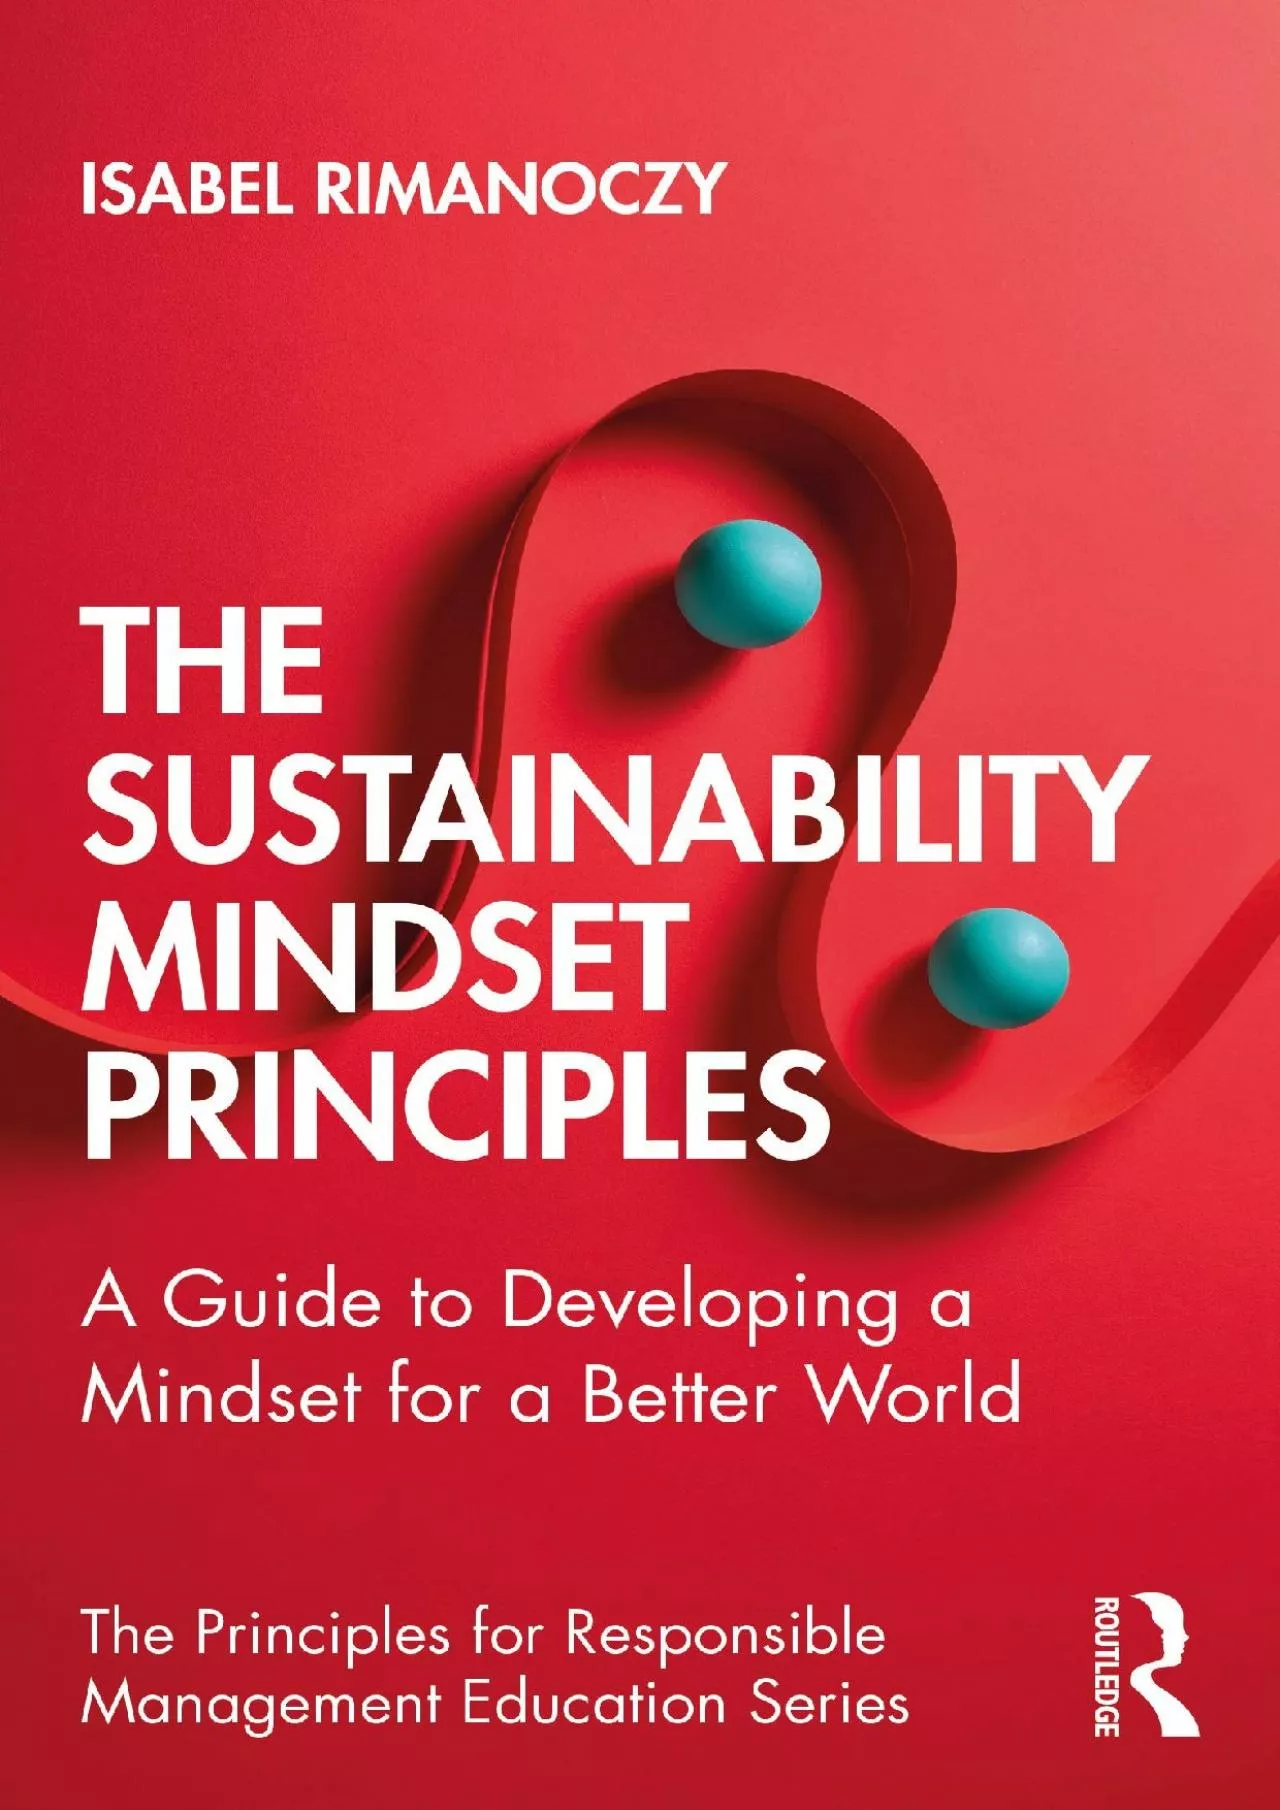 (EBOOK)-The Sustainability Mindset Principles: A Guide to Developing a Mindset for a Better